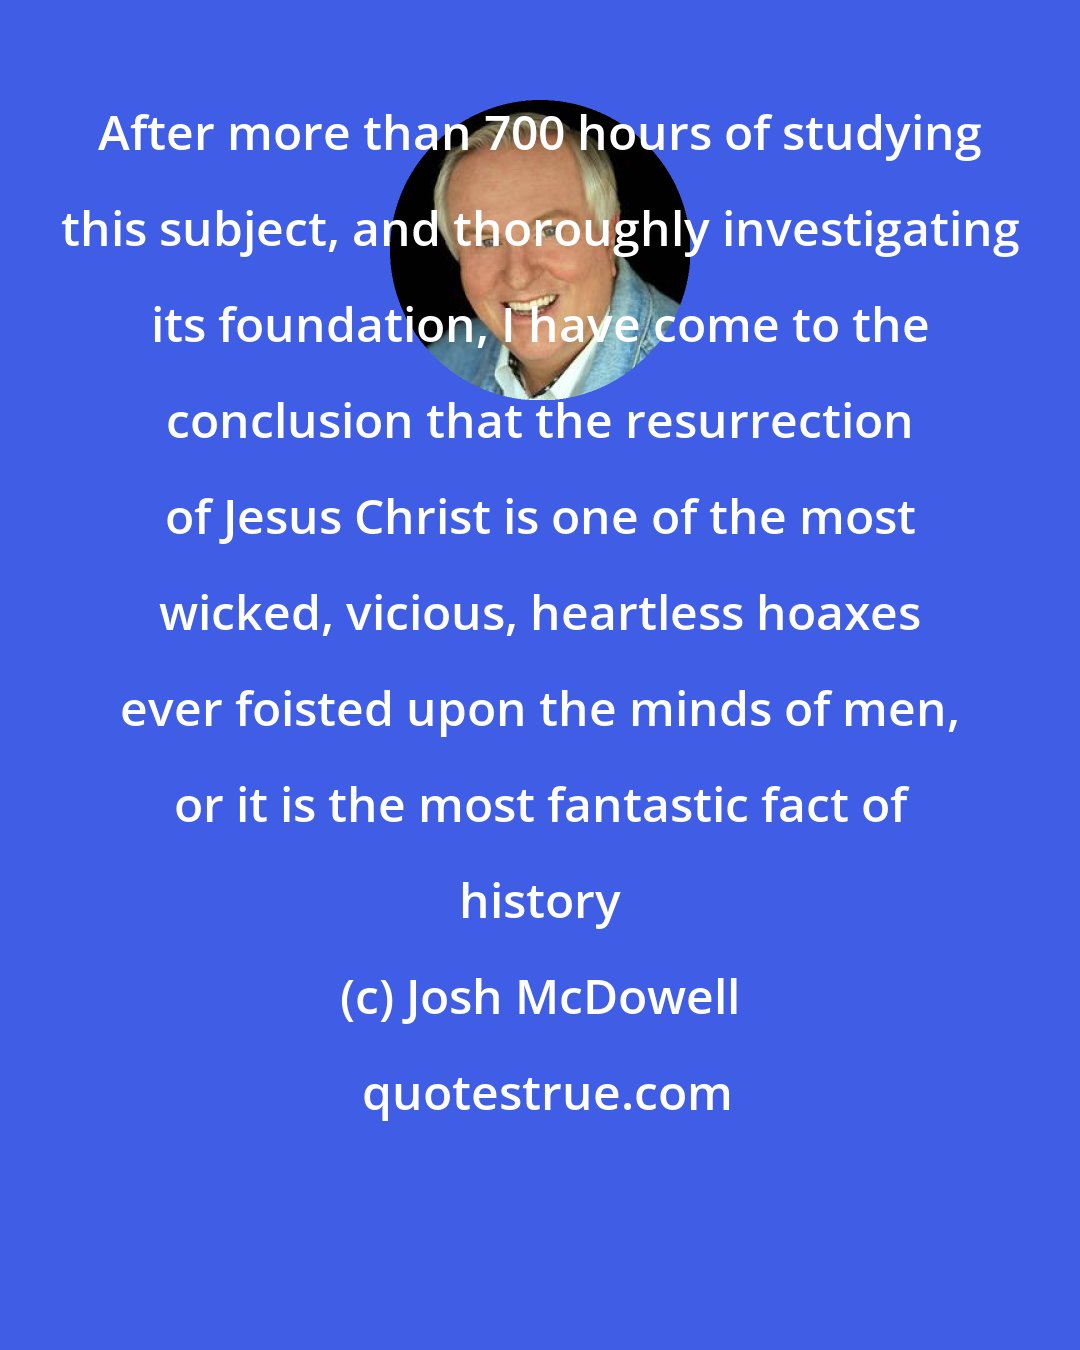 Josh McDowell: After more than 700 hours of studying this subject, and thoroughly investigating its foundation, I have come to the conclusion that the resurrection of Jesus Christ is one of the most wicked, vicious, heartless hoaxes ever foisted upon the minds of men, or it is the most fantastic fact of history